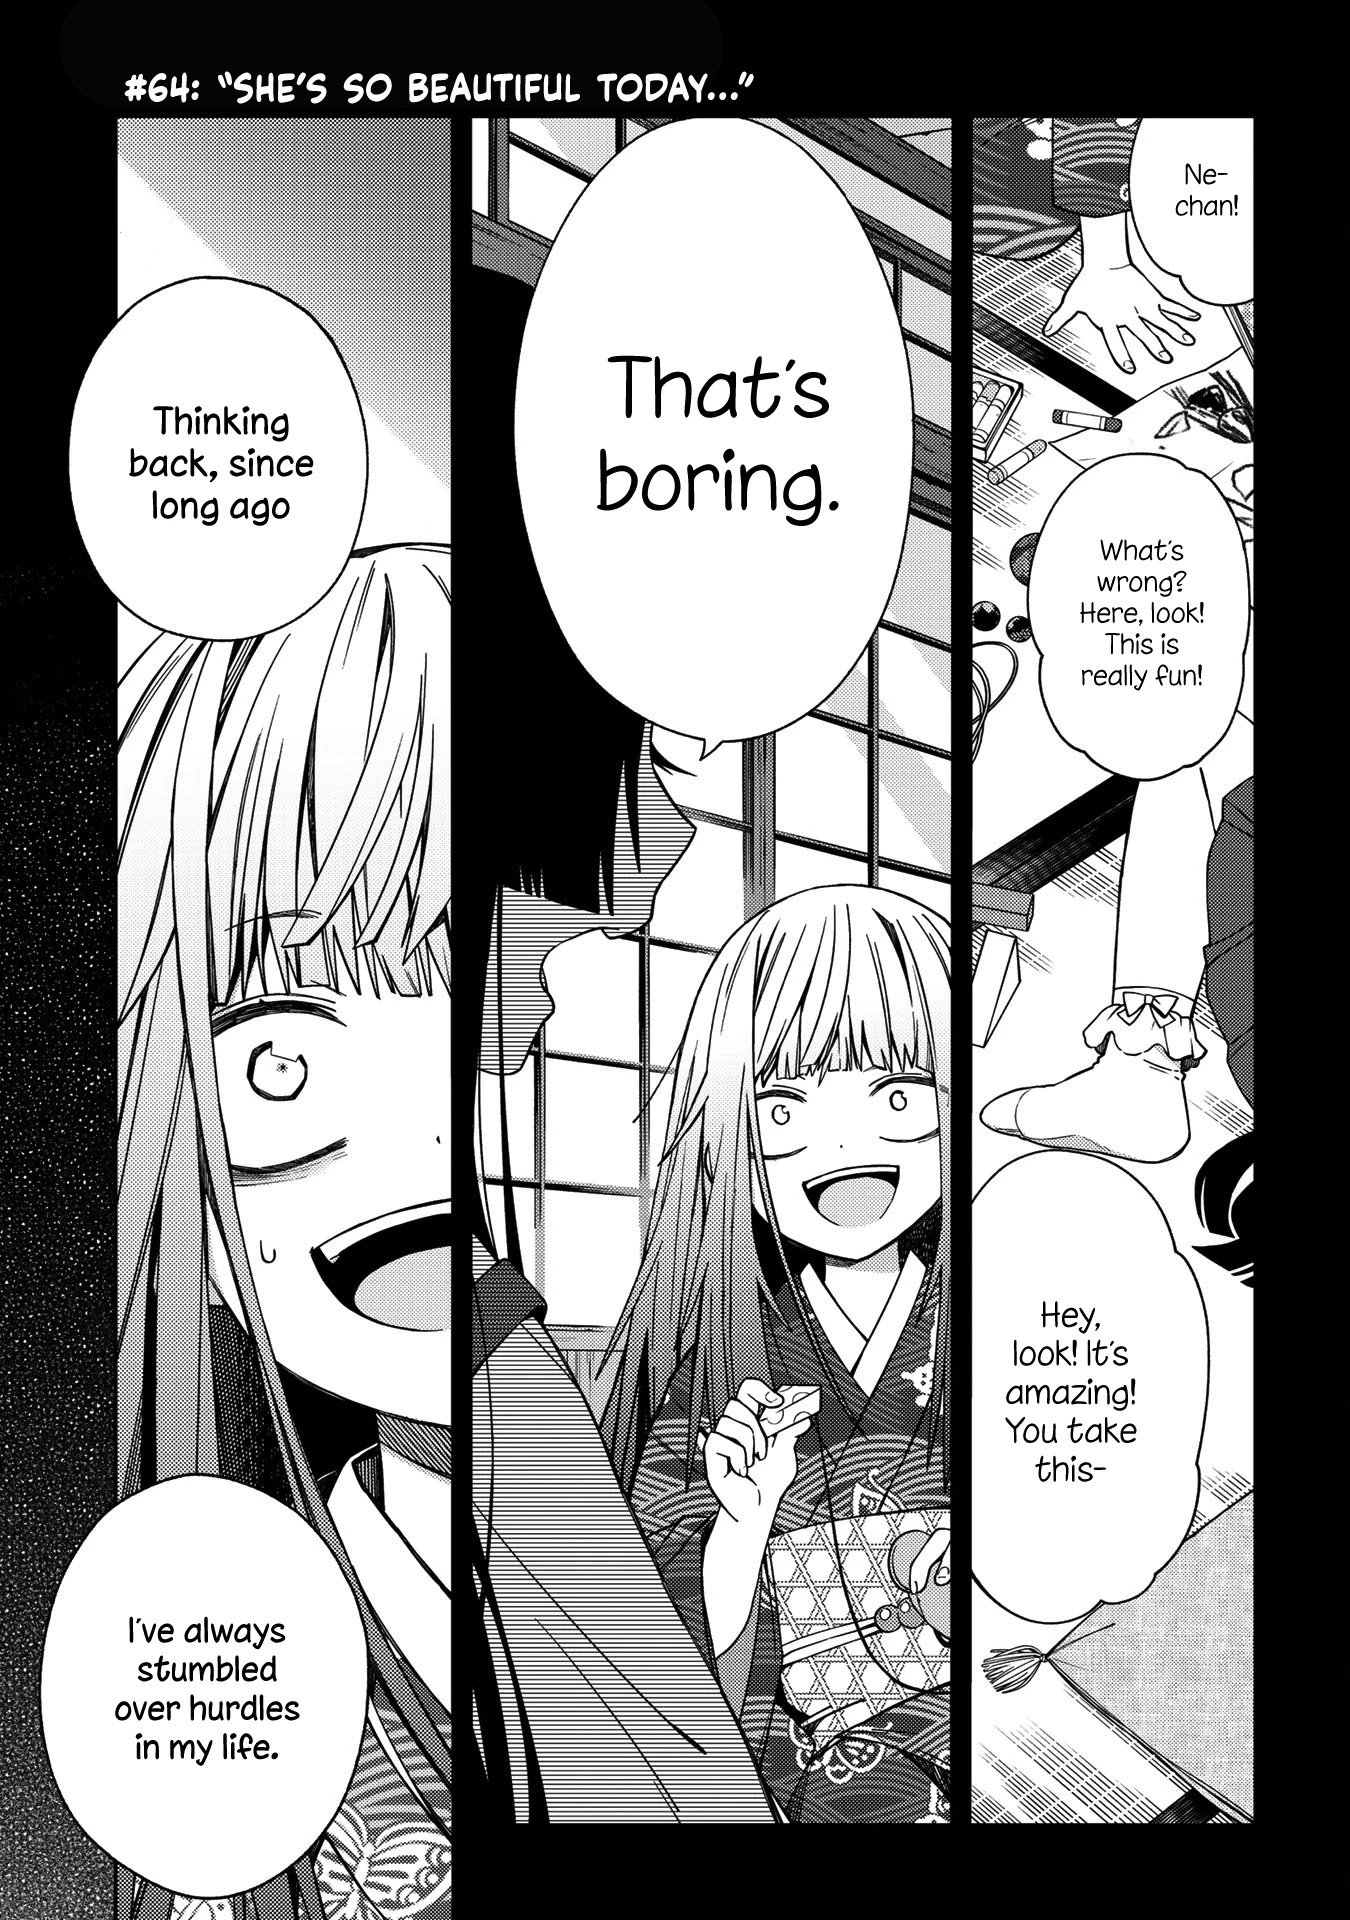 School Zone (Ningiyau) Chapter 64: She's So Beautiful Today... - Picture 1